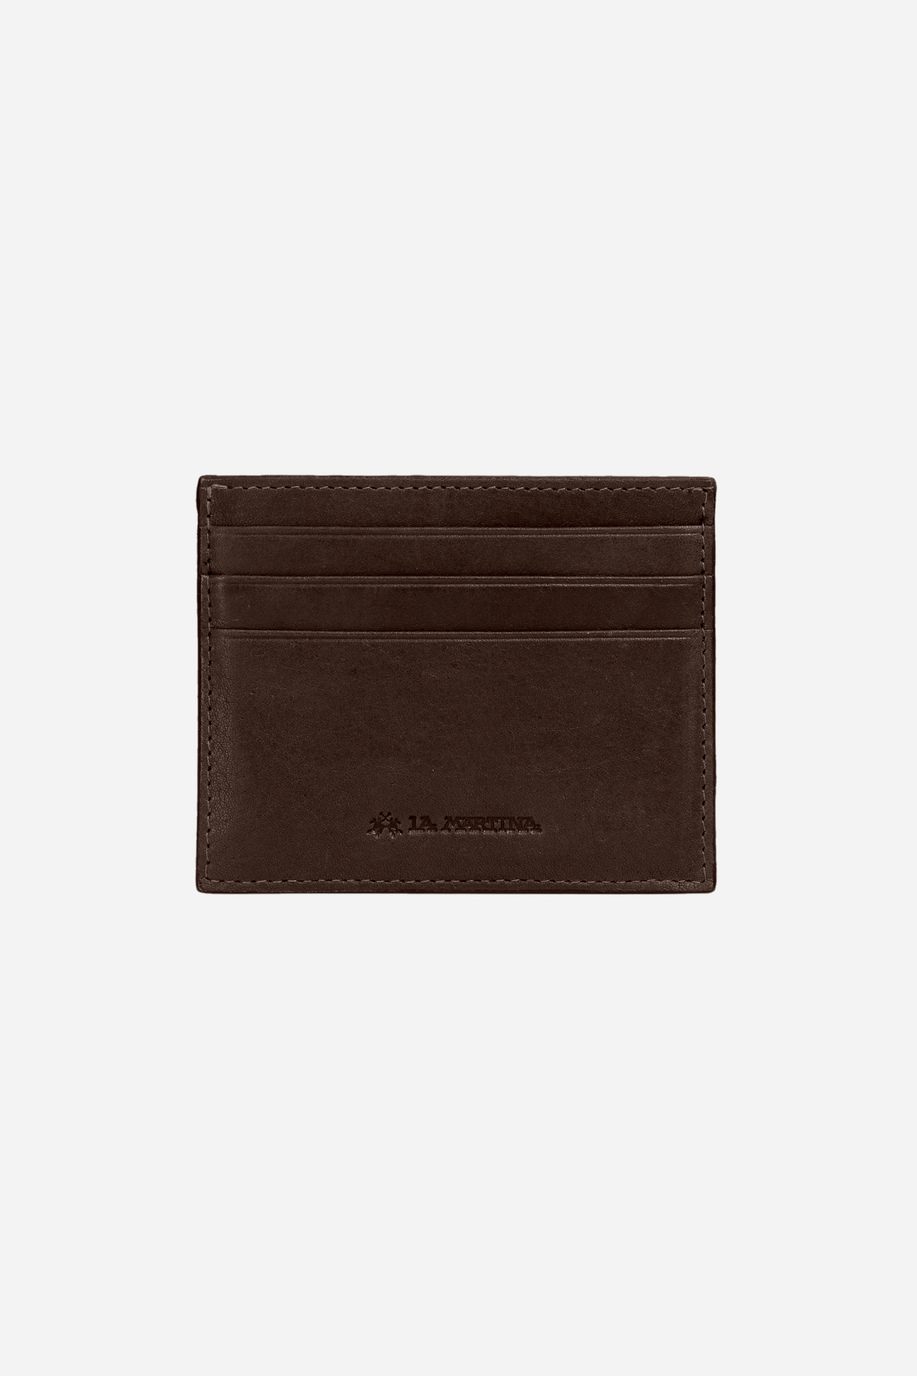 Leather card holder - Paulo - Wallets and key chains | La Martina - Official Online Shop